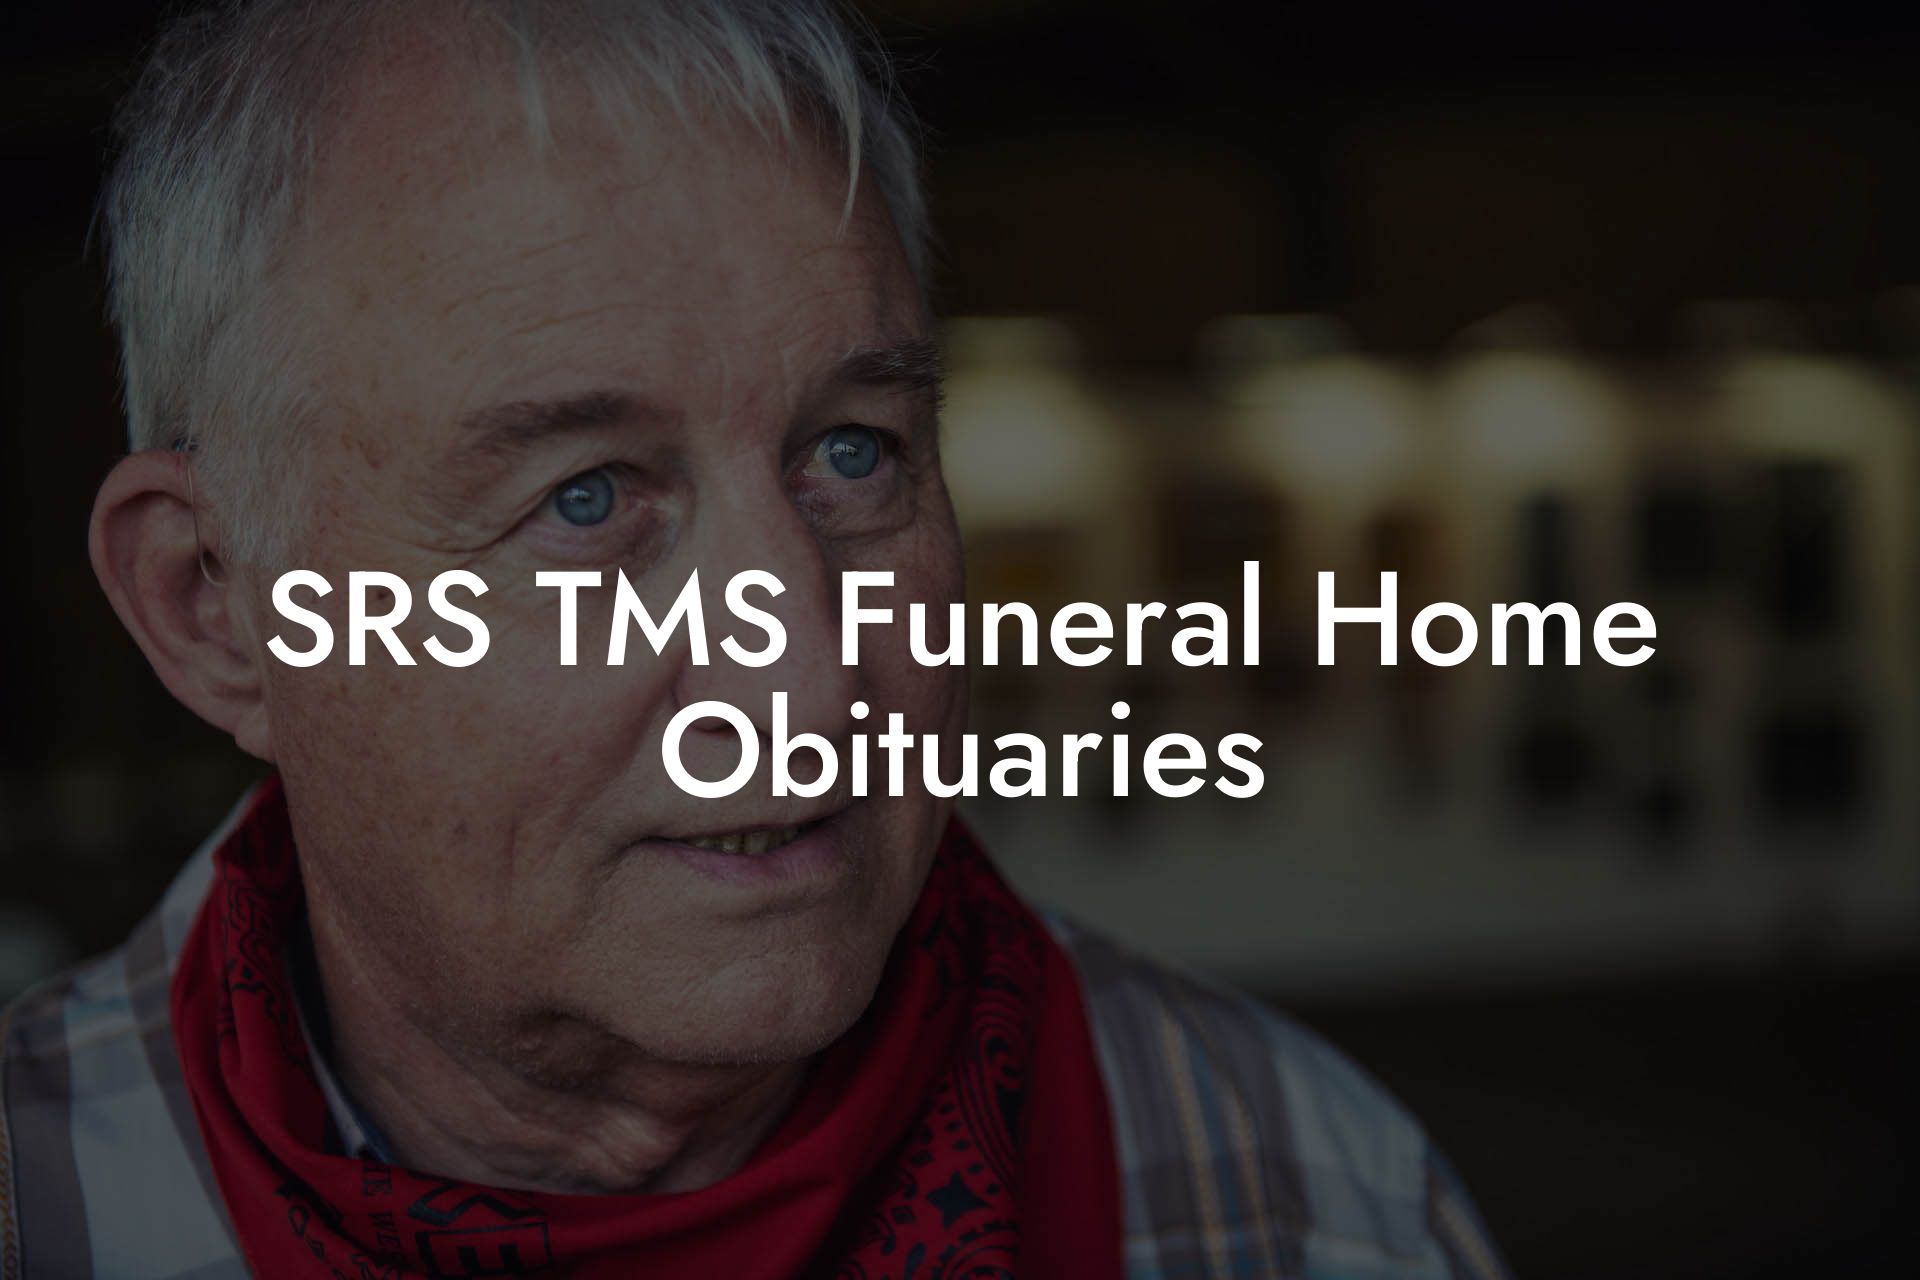 SRS TMS Funeral Home Obituaries